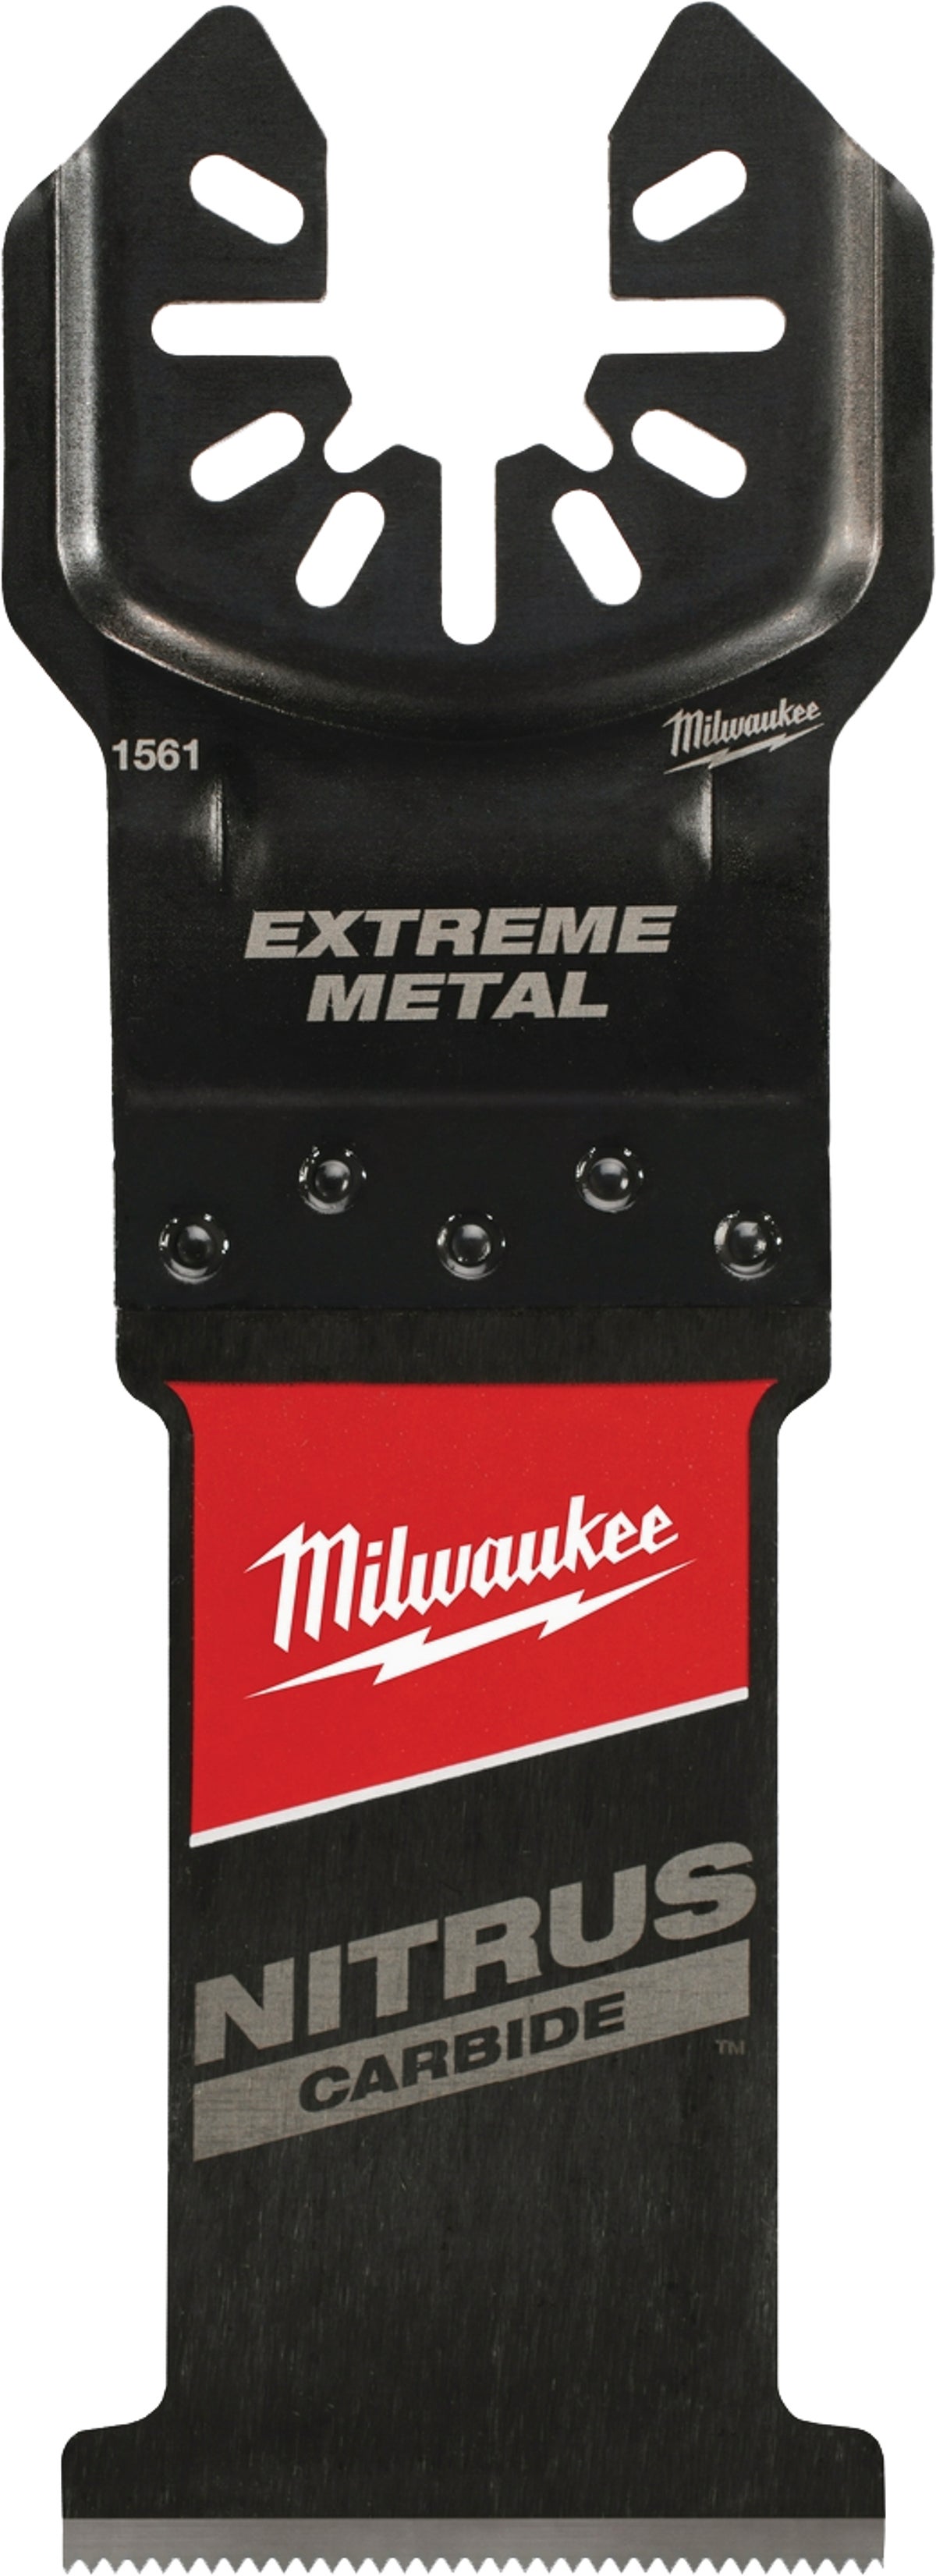 Milwaukee 49-10-9000 OPEN-LOK Multi-Tool Adapters for Dremel MM45 and mm50